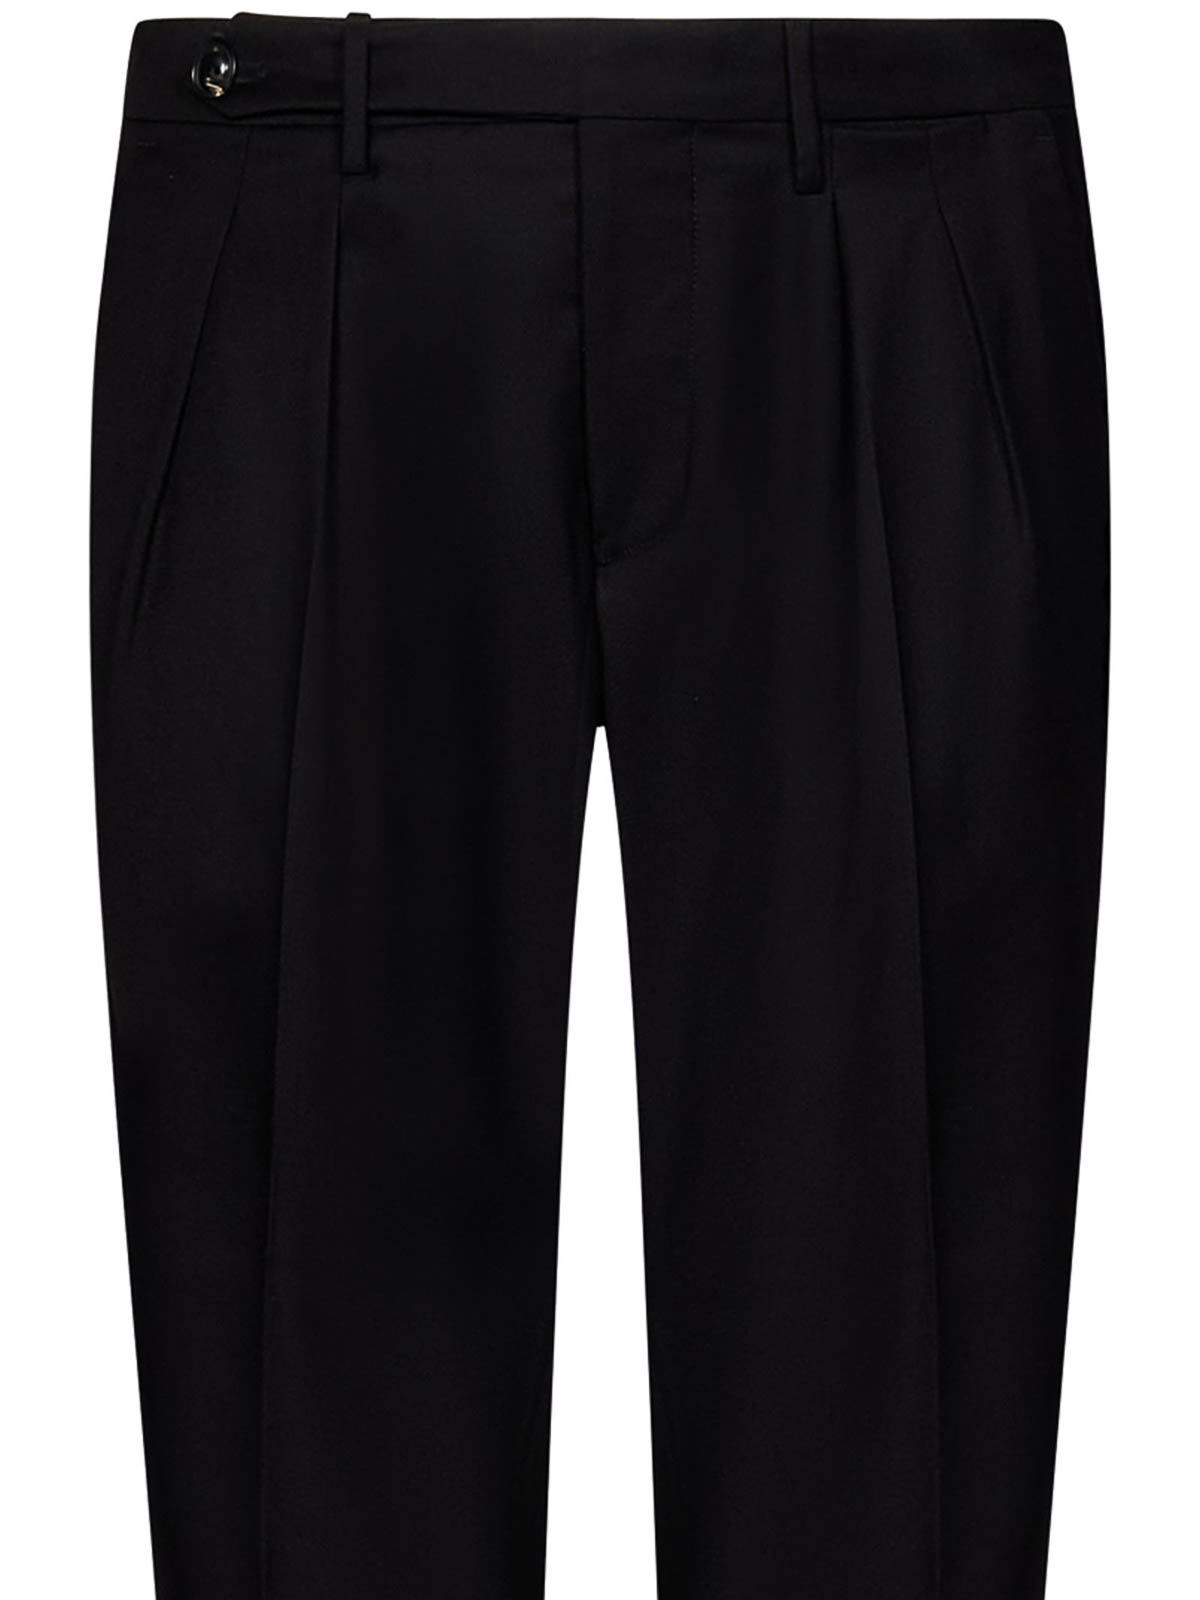 Shop Michele Carbone Black Tailored Trousers